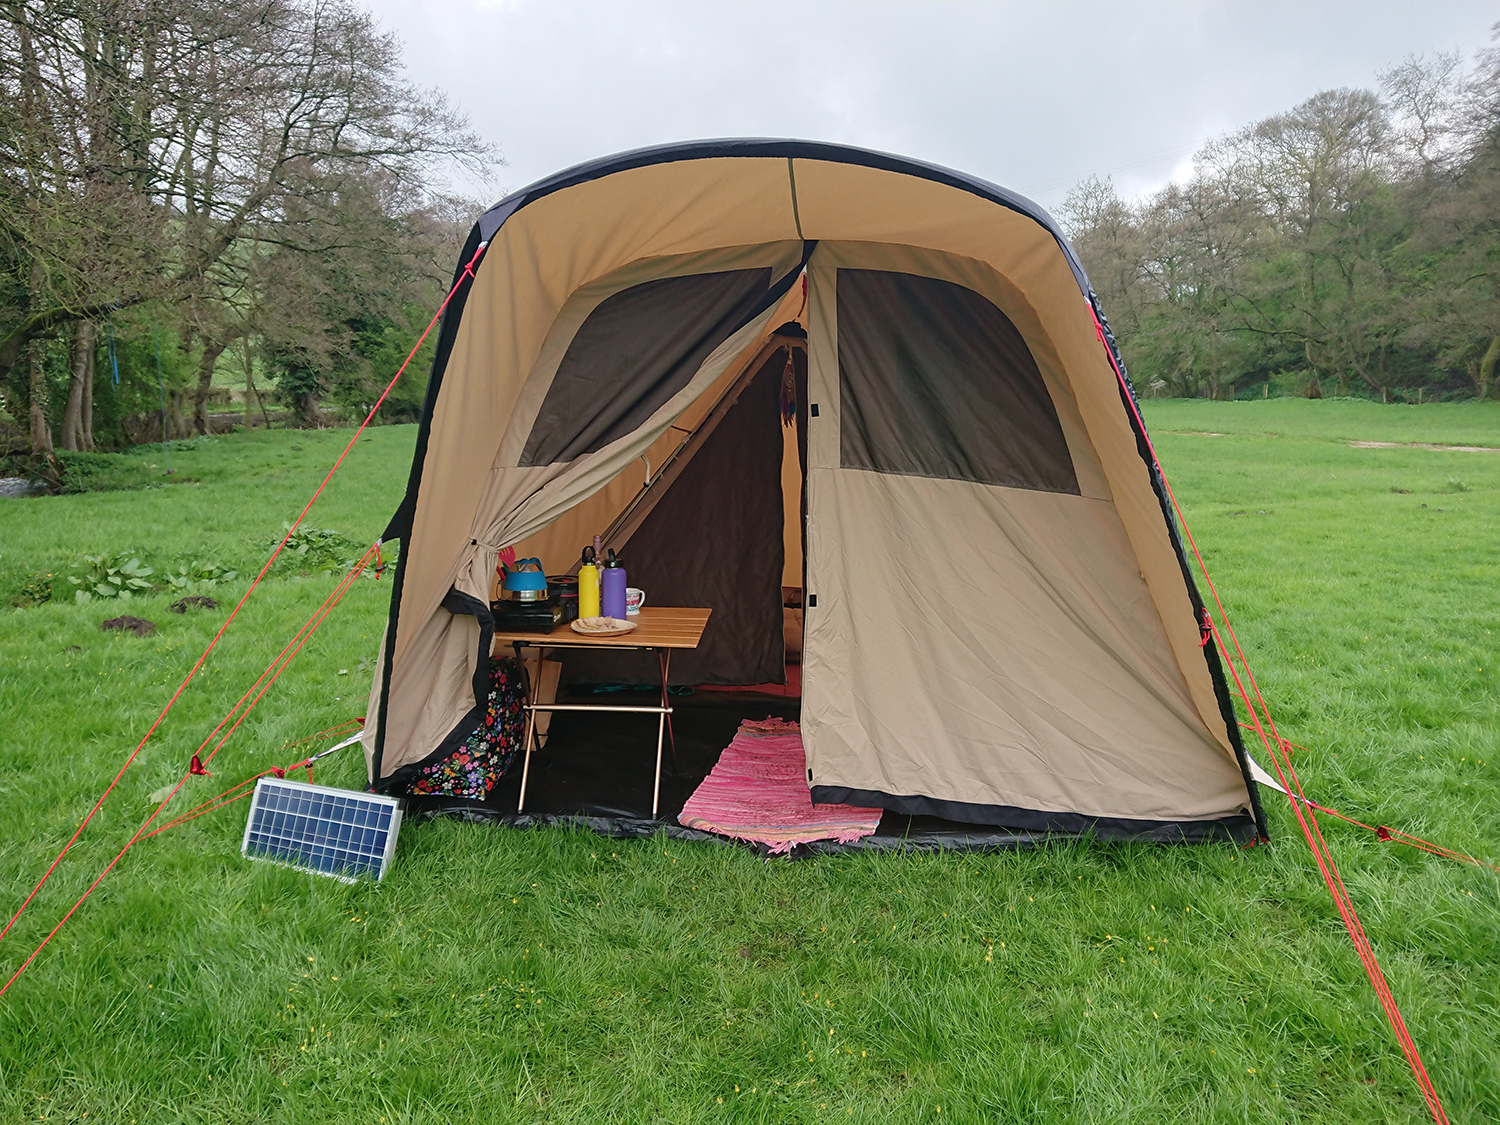 Camping at Low Farm campsite